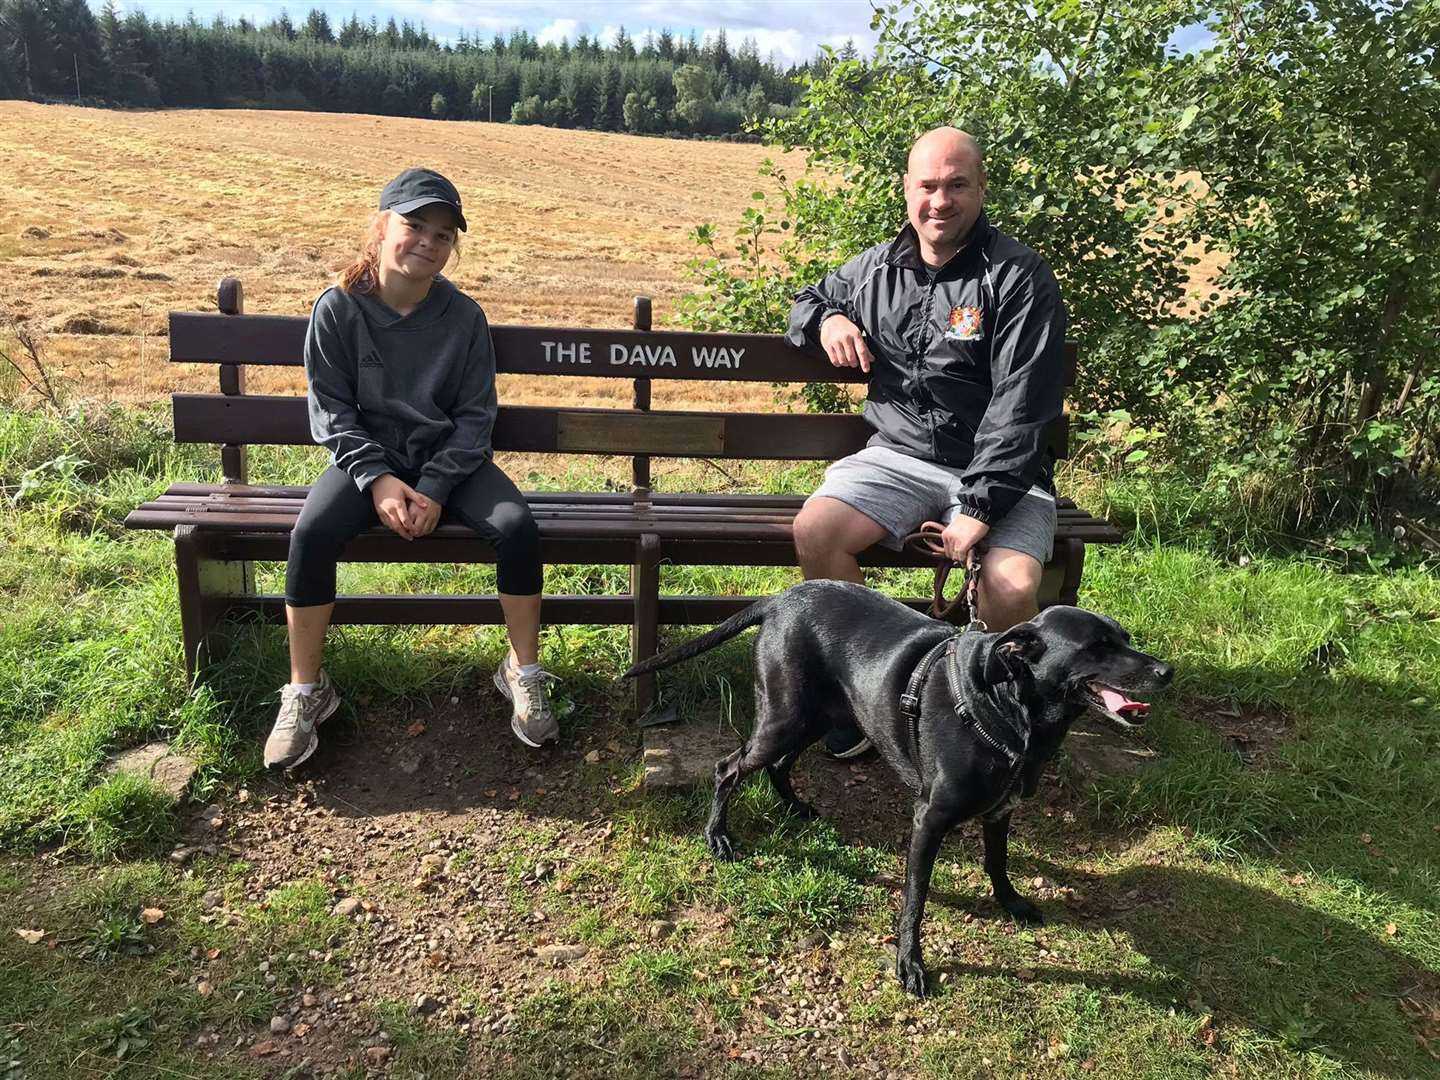 Roxy and Ross Homer having a rest at the half way point on the Dava Way.